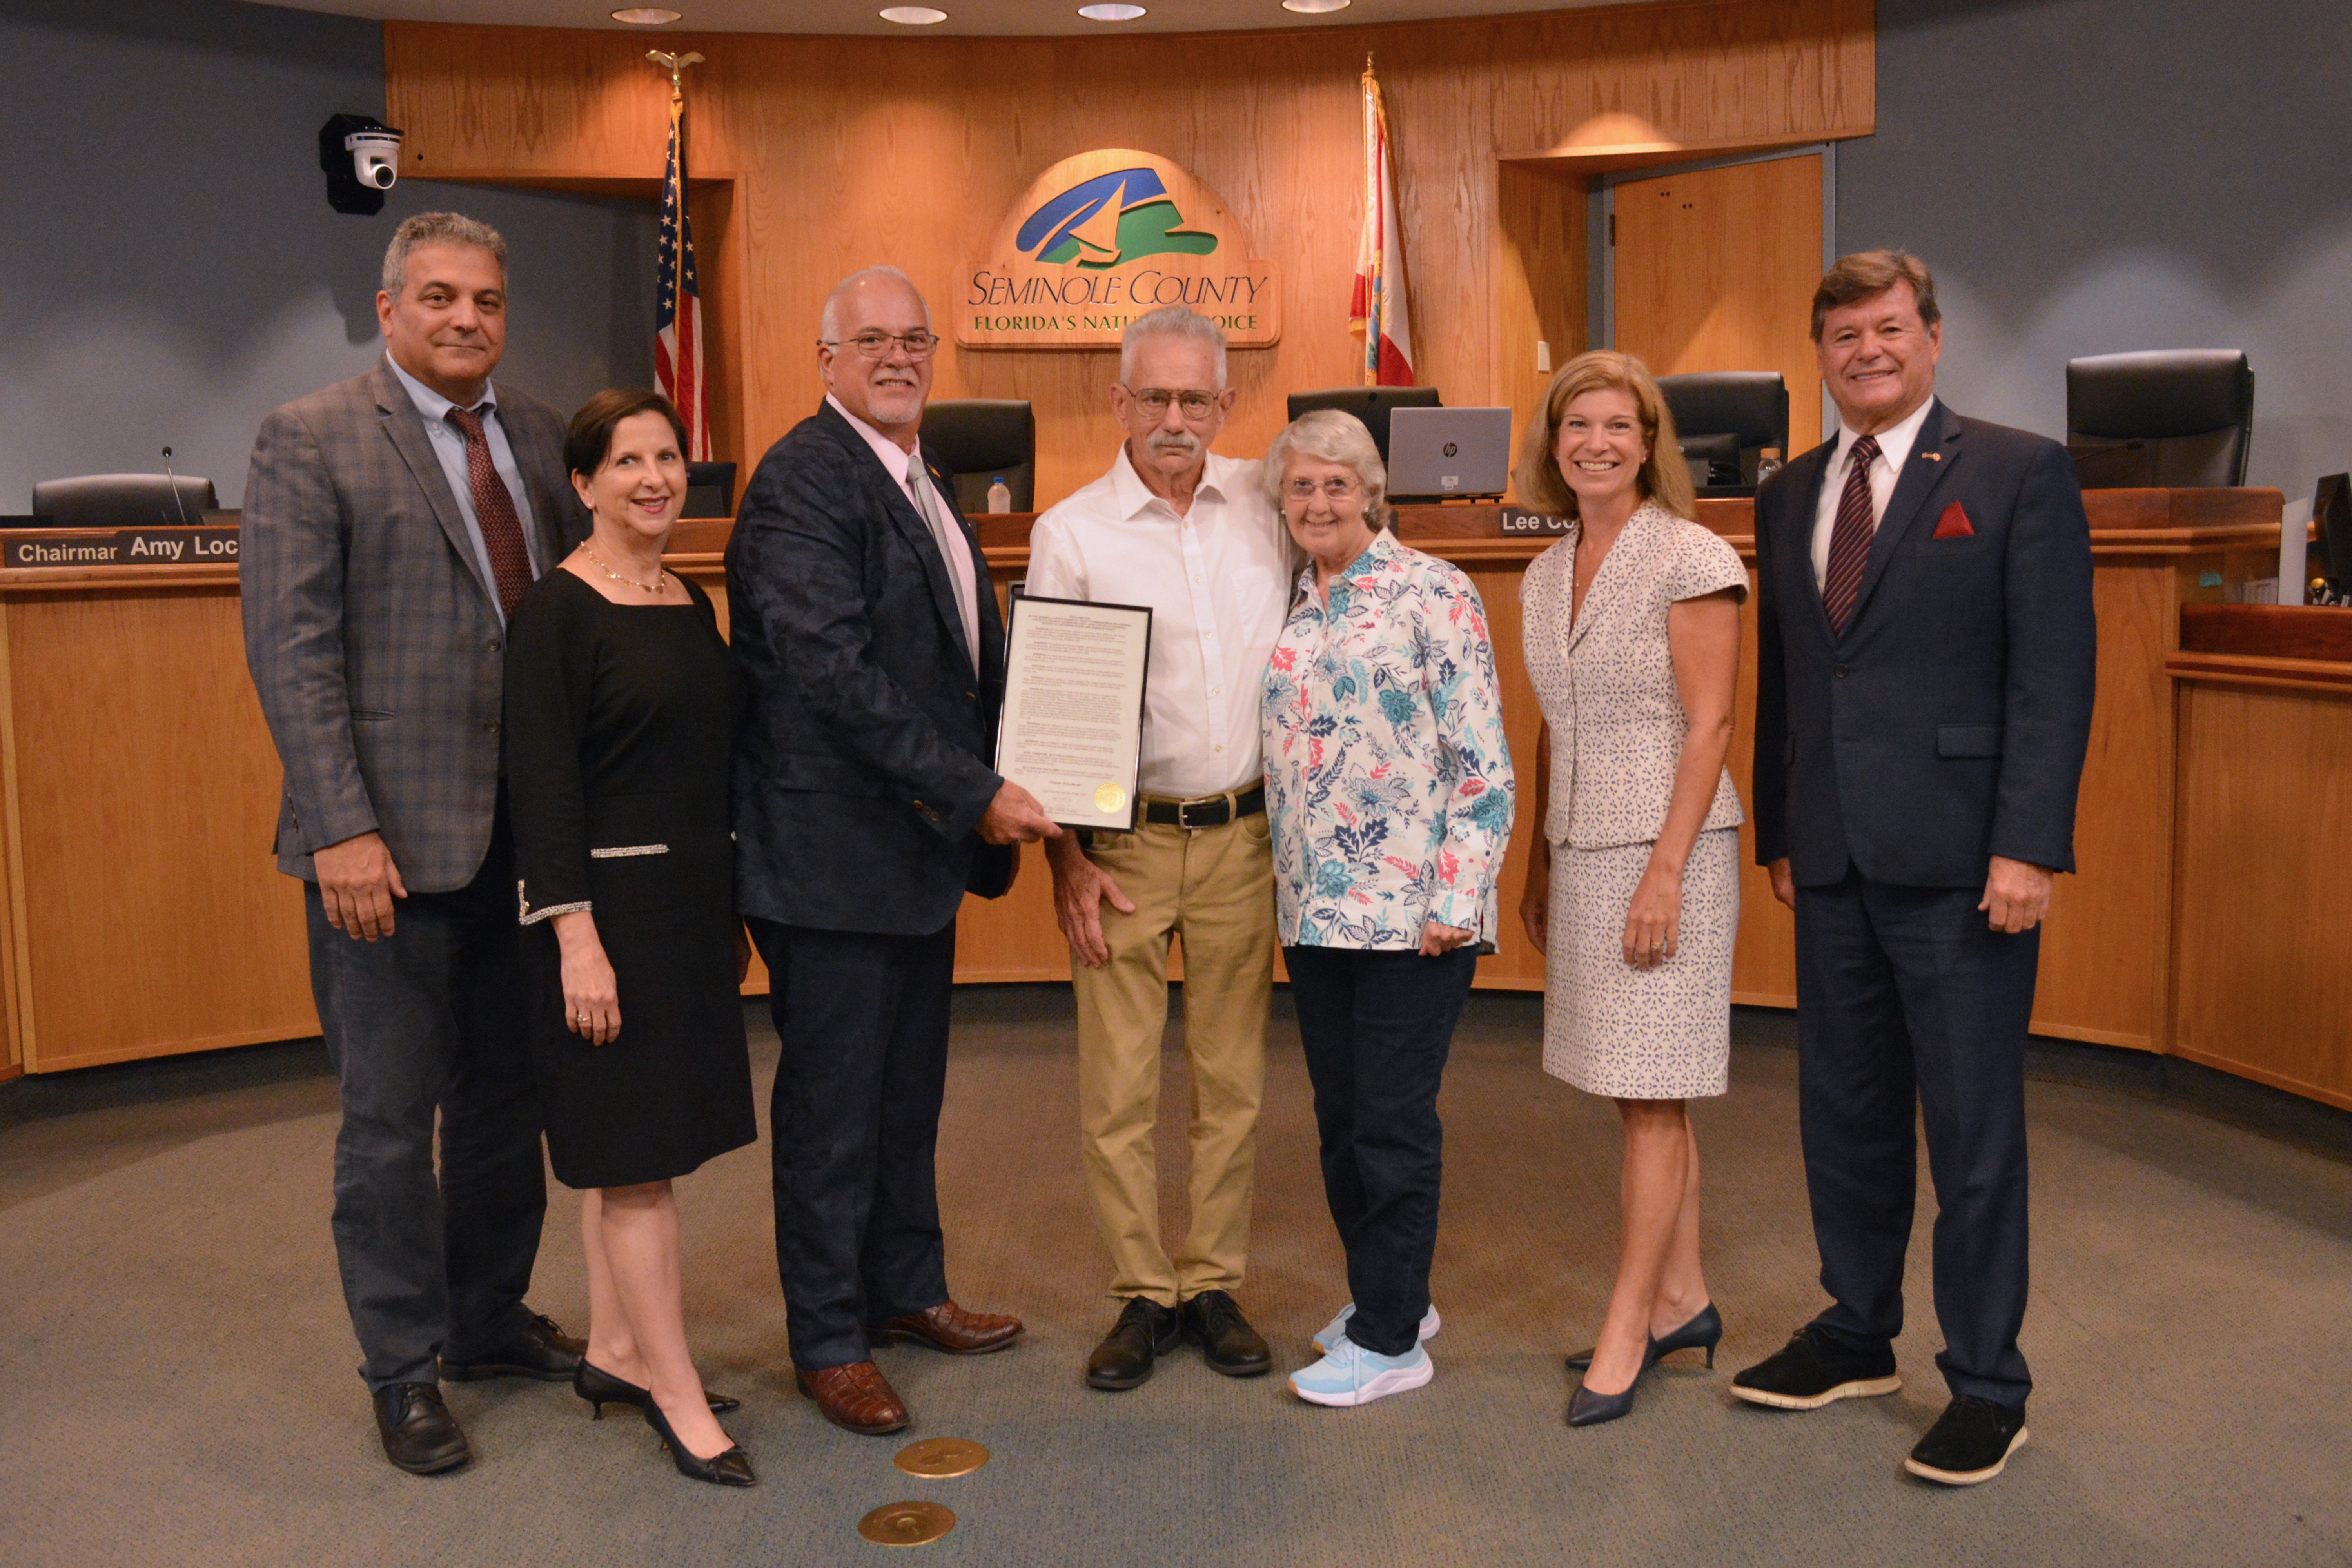 Proclaiming Navy Seaman William F. Hyde, United States Navy as Seminole County's May Veteran of the Month. (Seaman William F. Hyde, United States Navy)